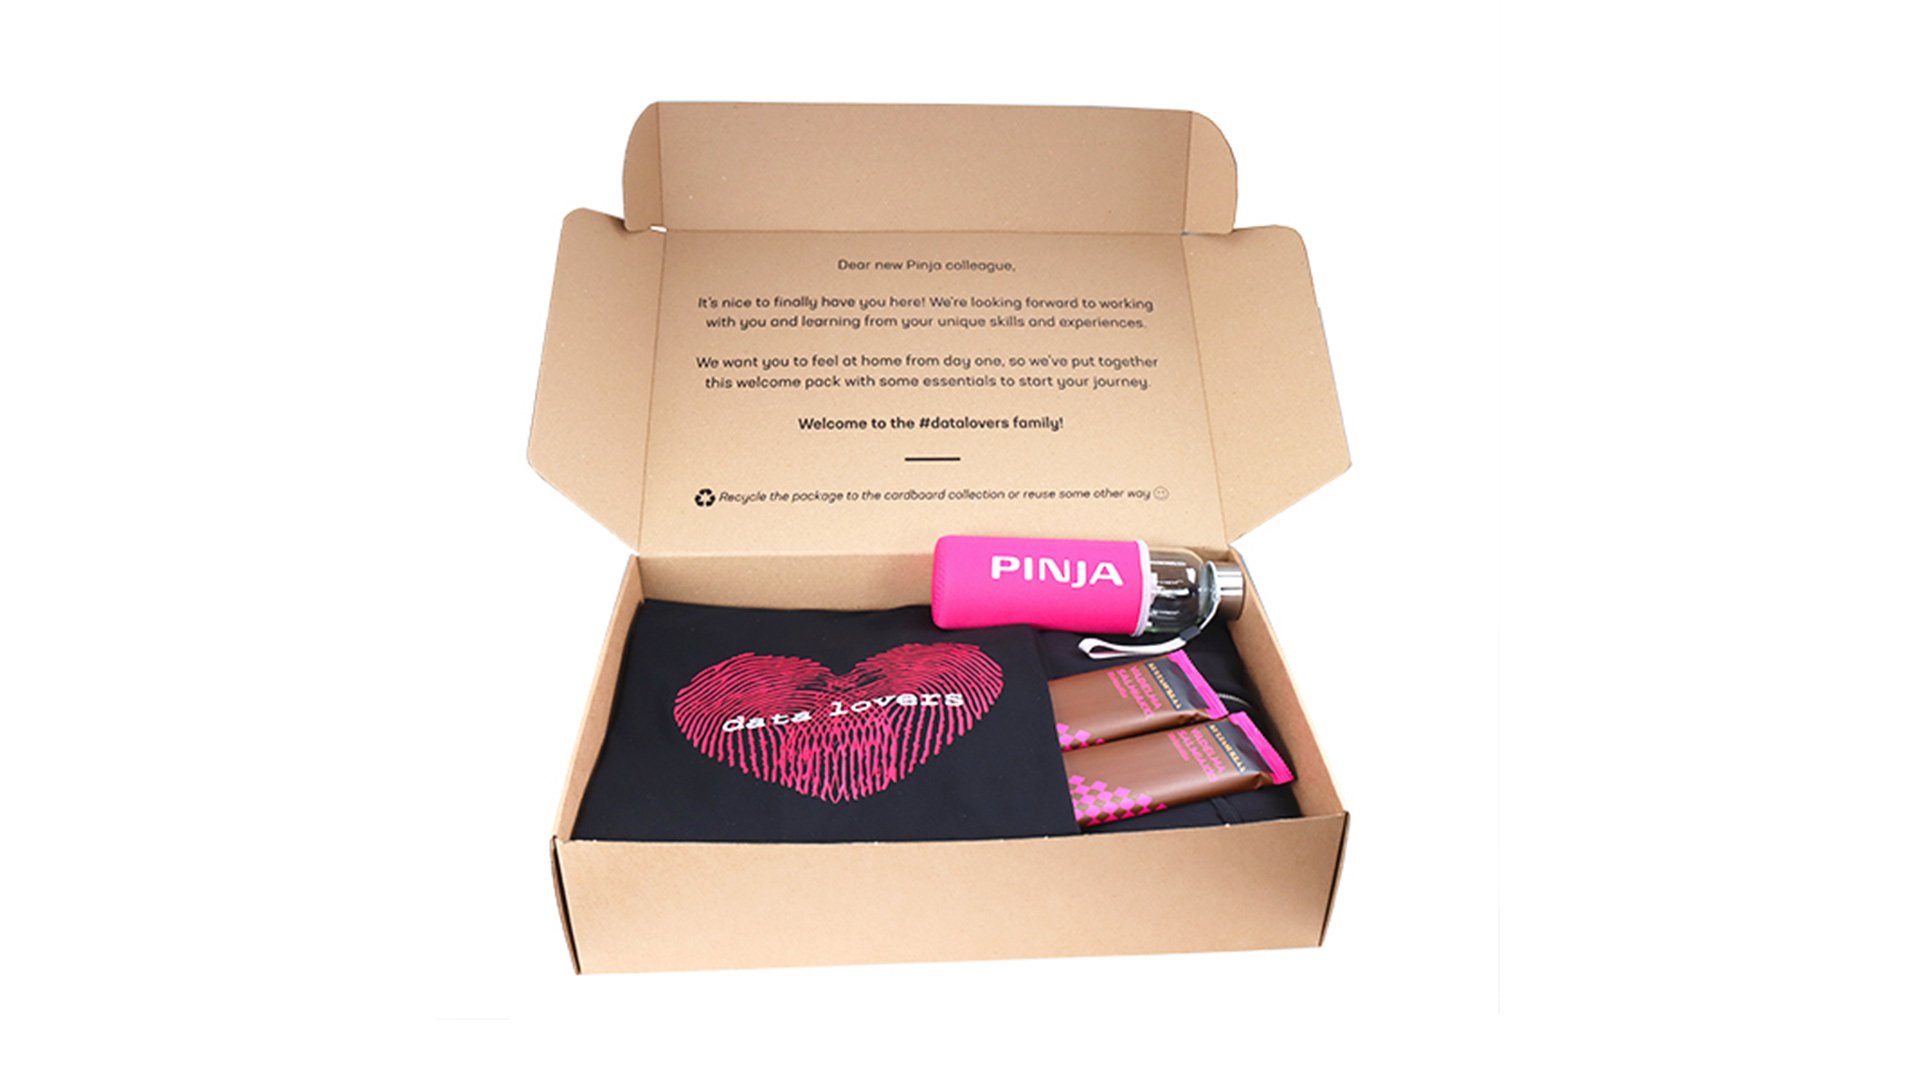 The picture shows the Welcome Box of the new Pinjan